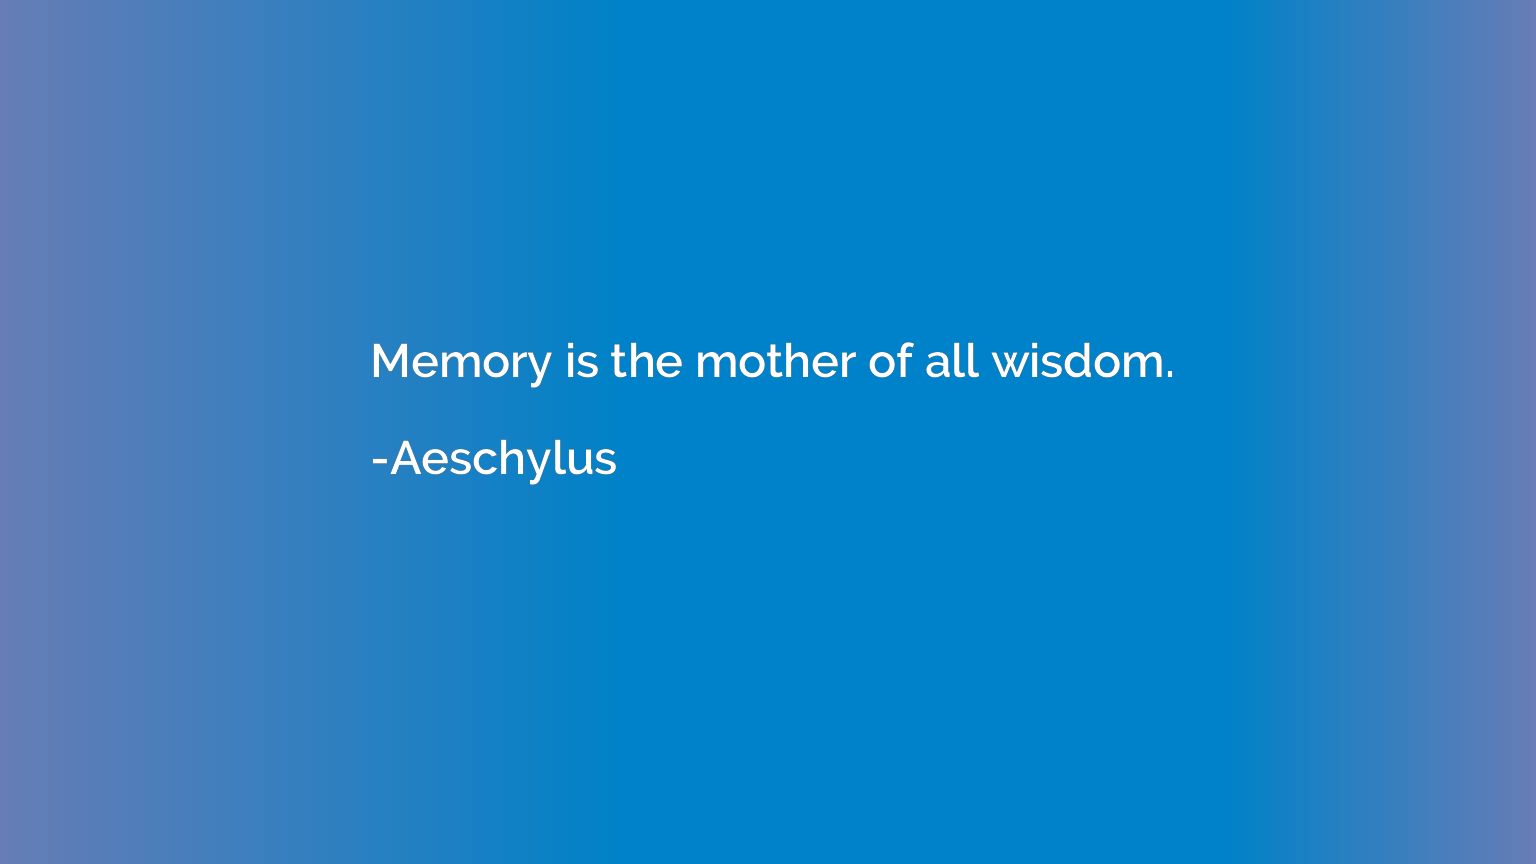 Memory is the mother of all wisdom.